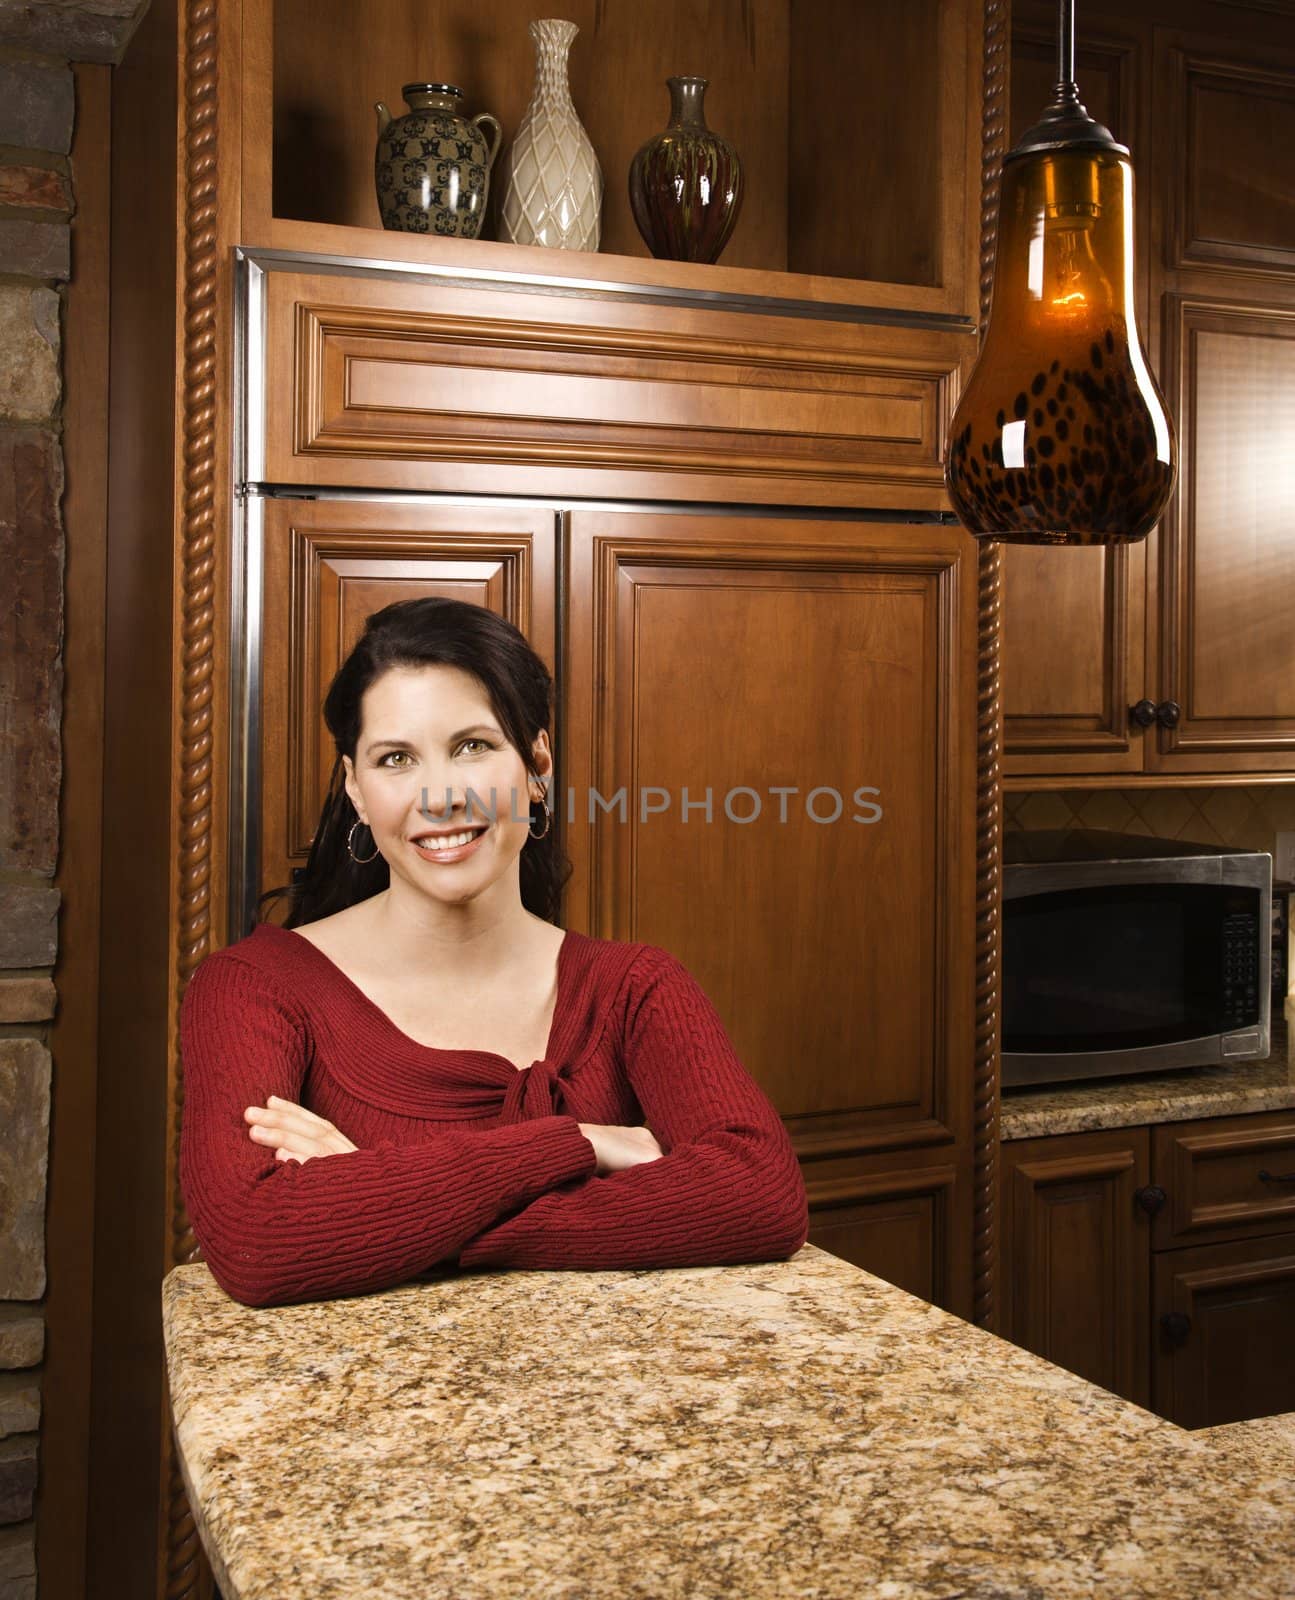 Caucasian woman leaning on marble kitchen counter smiling with arms crossed and looking at viewer.